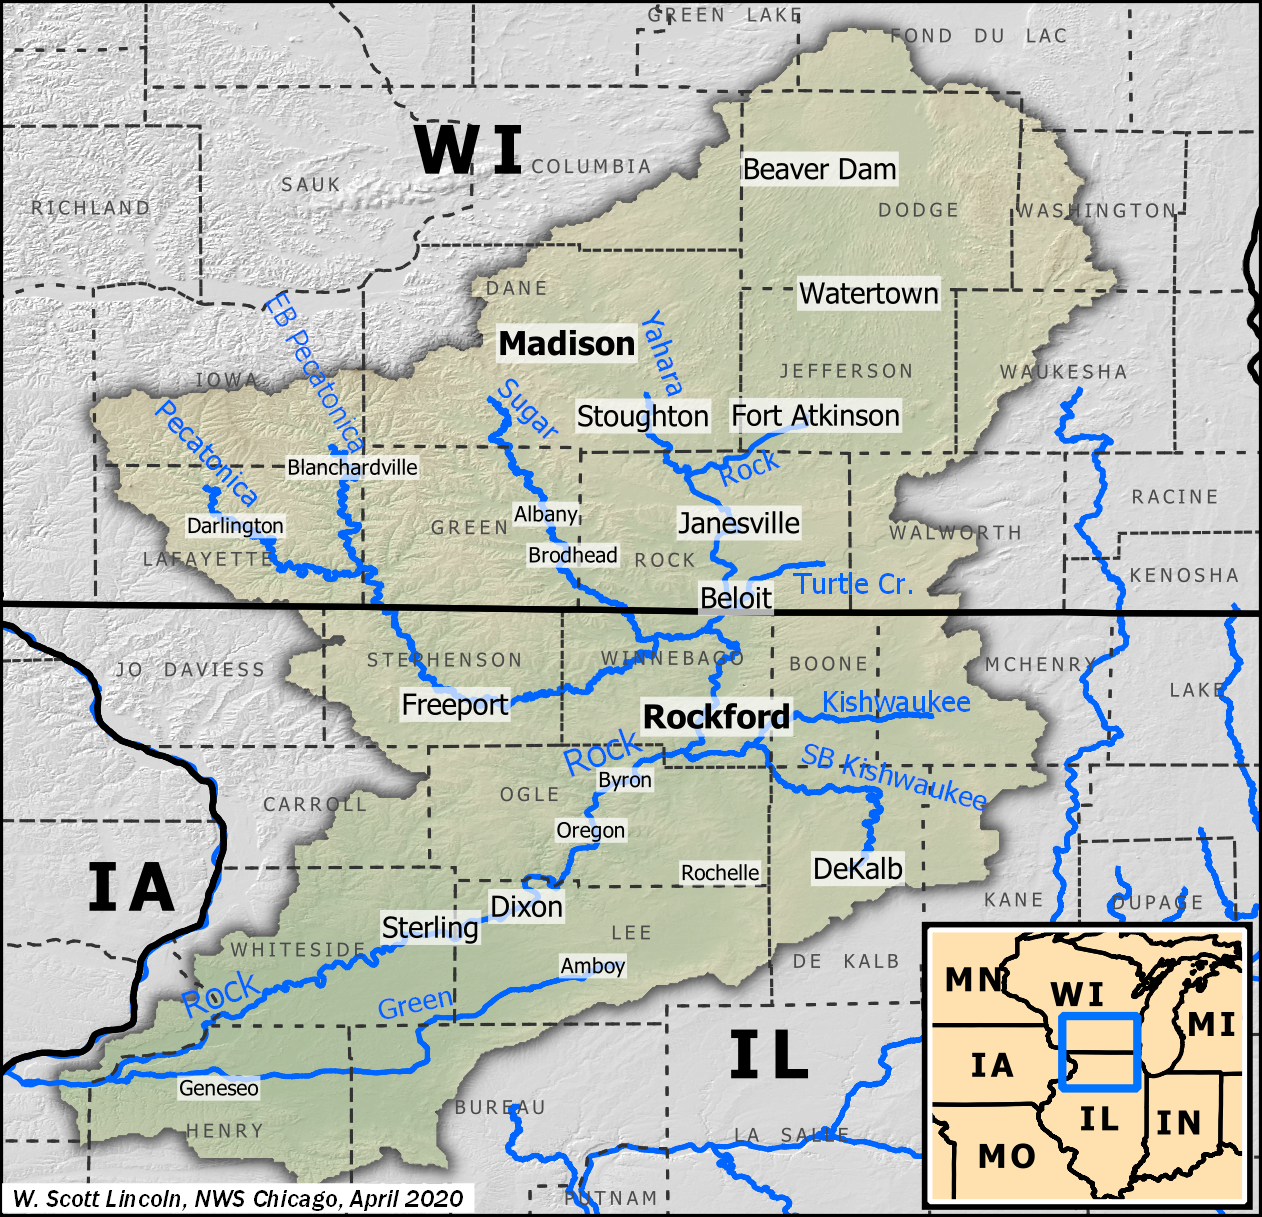 Map of the Rock River Basin